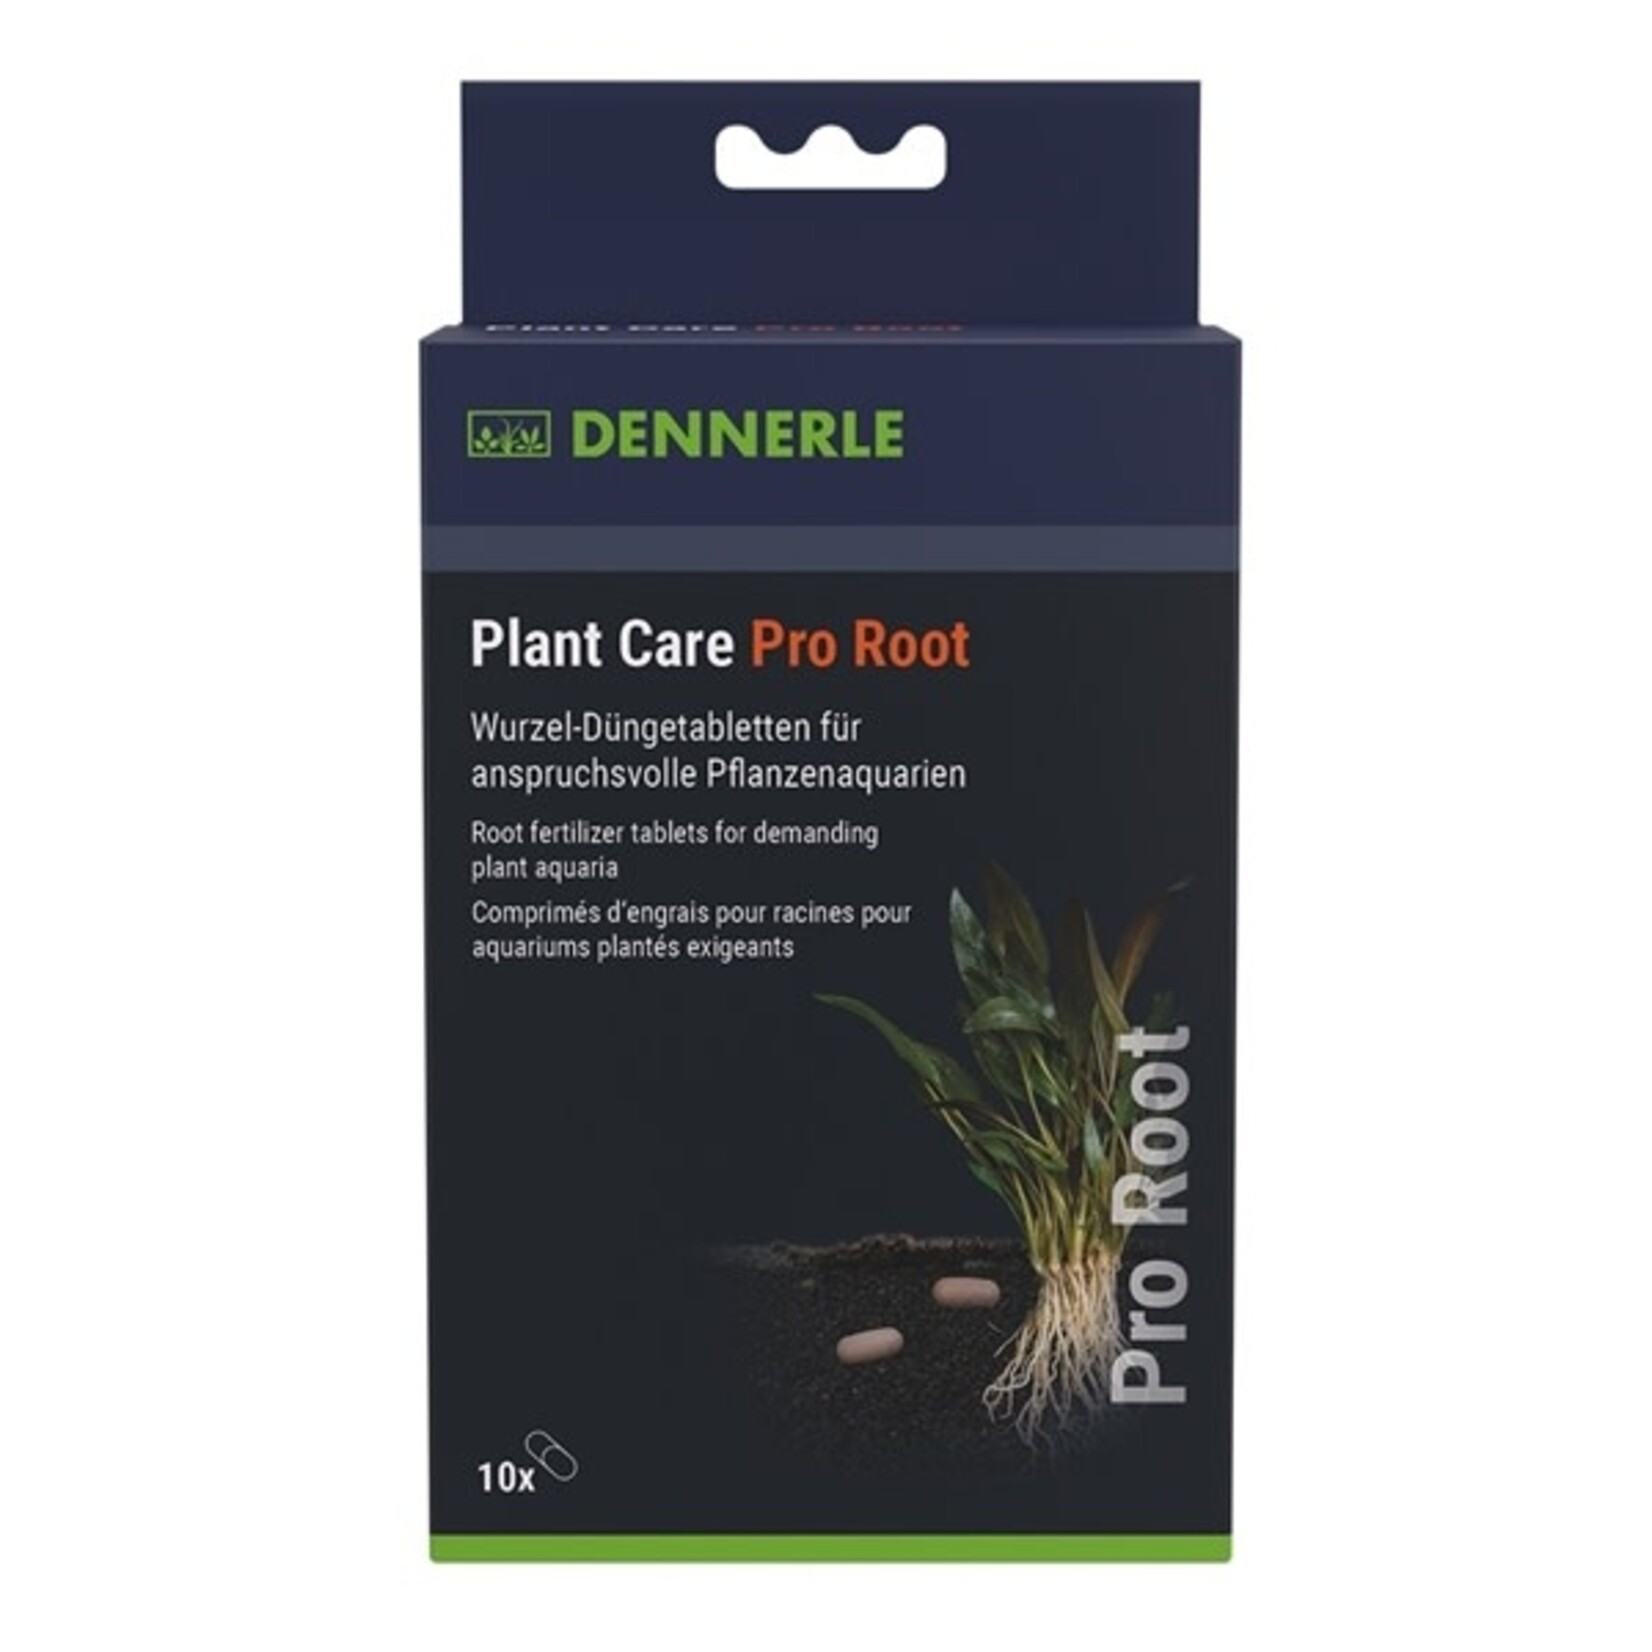 Dennerle Plant care pro root 10 st.